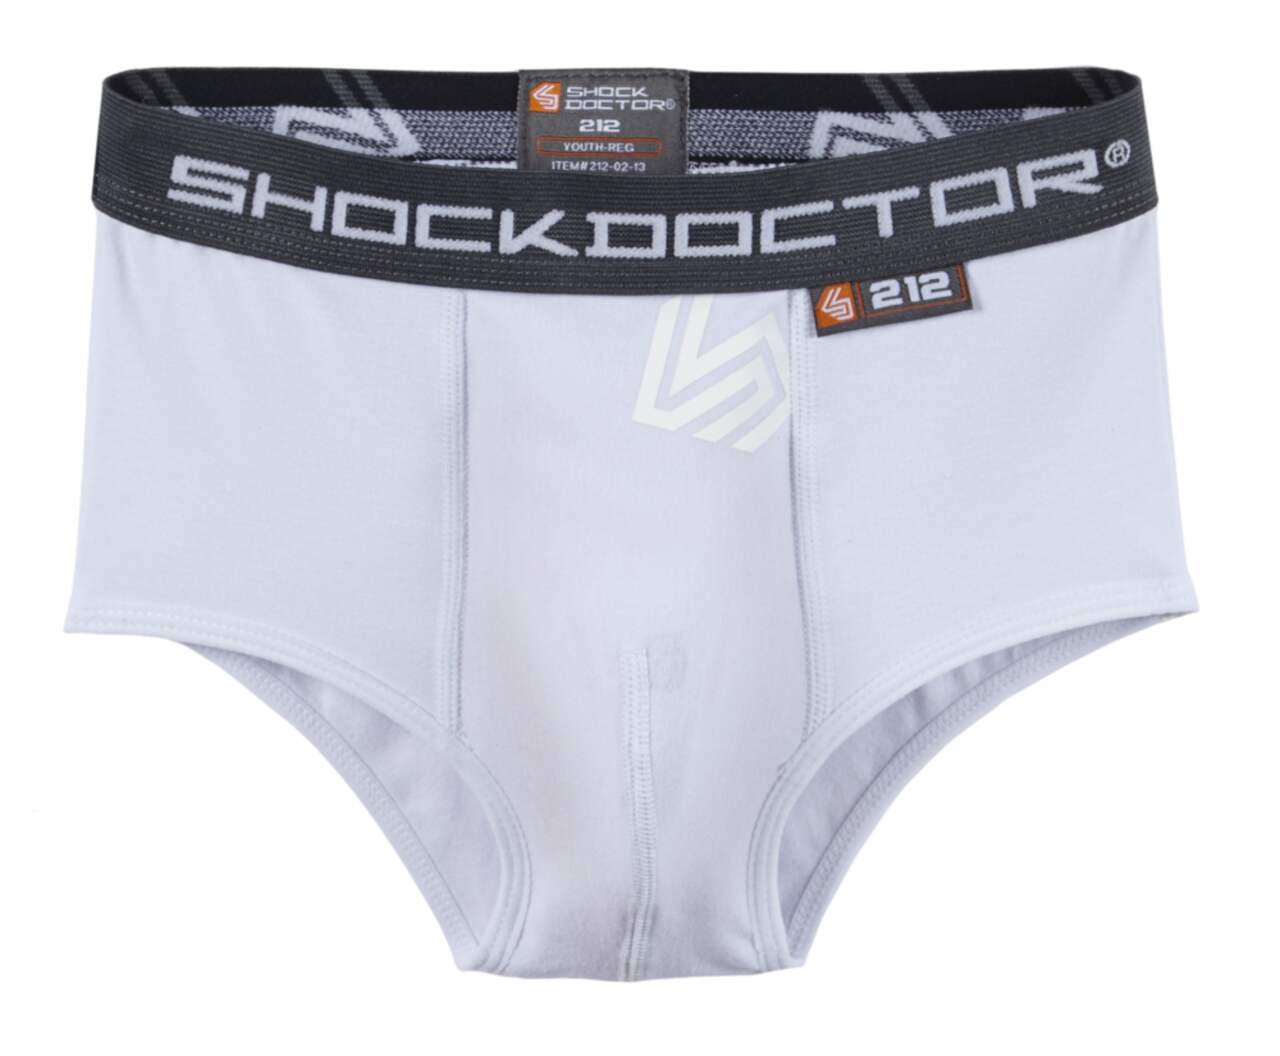 Shock Doctor Compression Shorts with Cup Pocket - Athletic Supporter -  Underwear with Pocket (Cup NOT Included) - White, Boys - Small